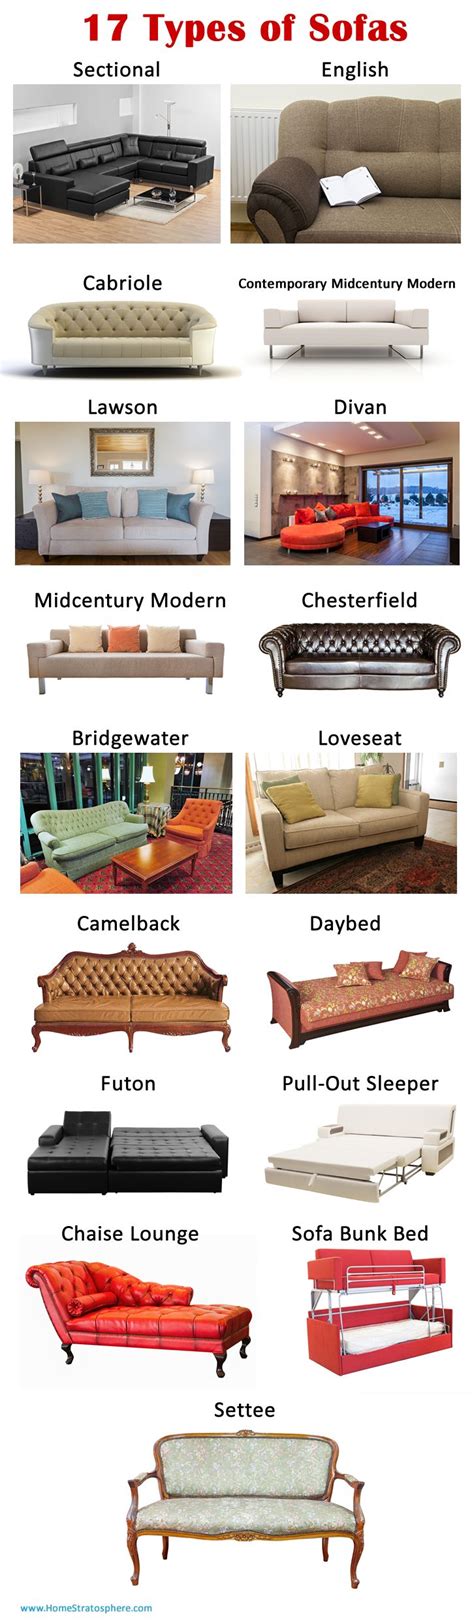 Styles Of Sofas And Couches Explained Buyer S Guide Types